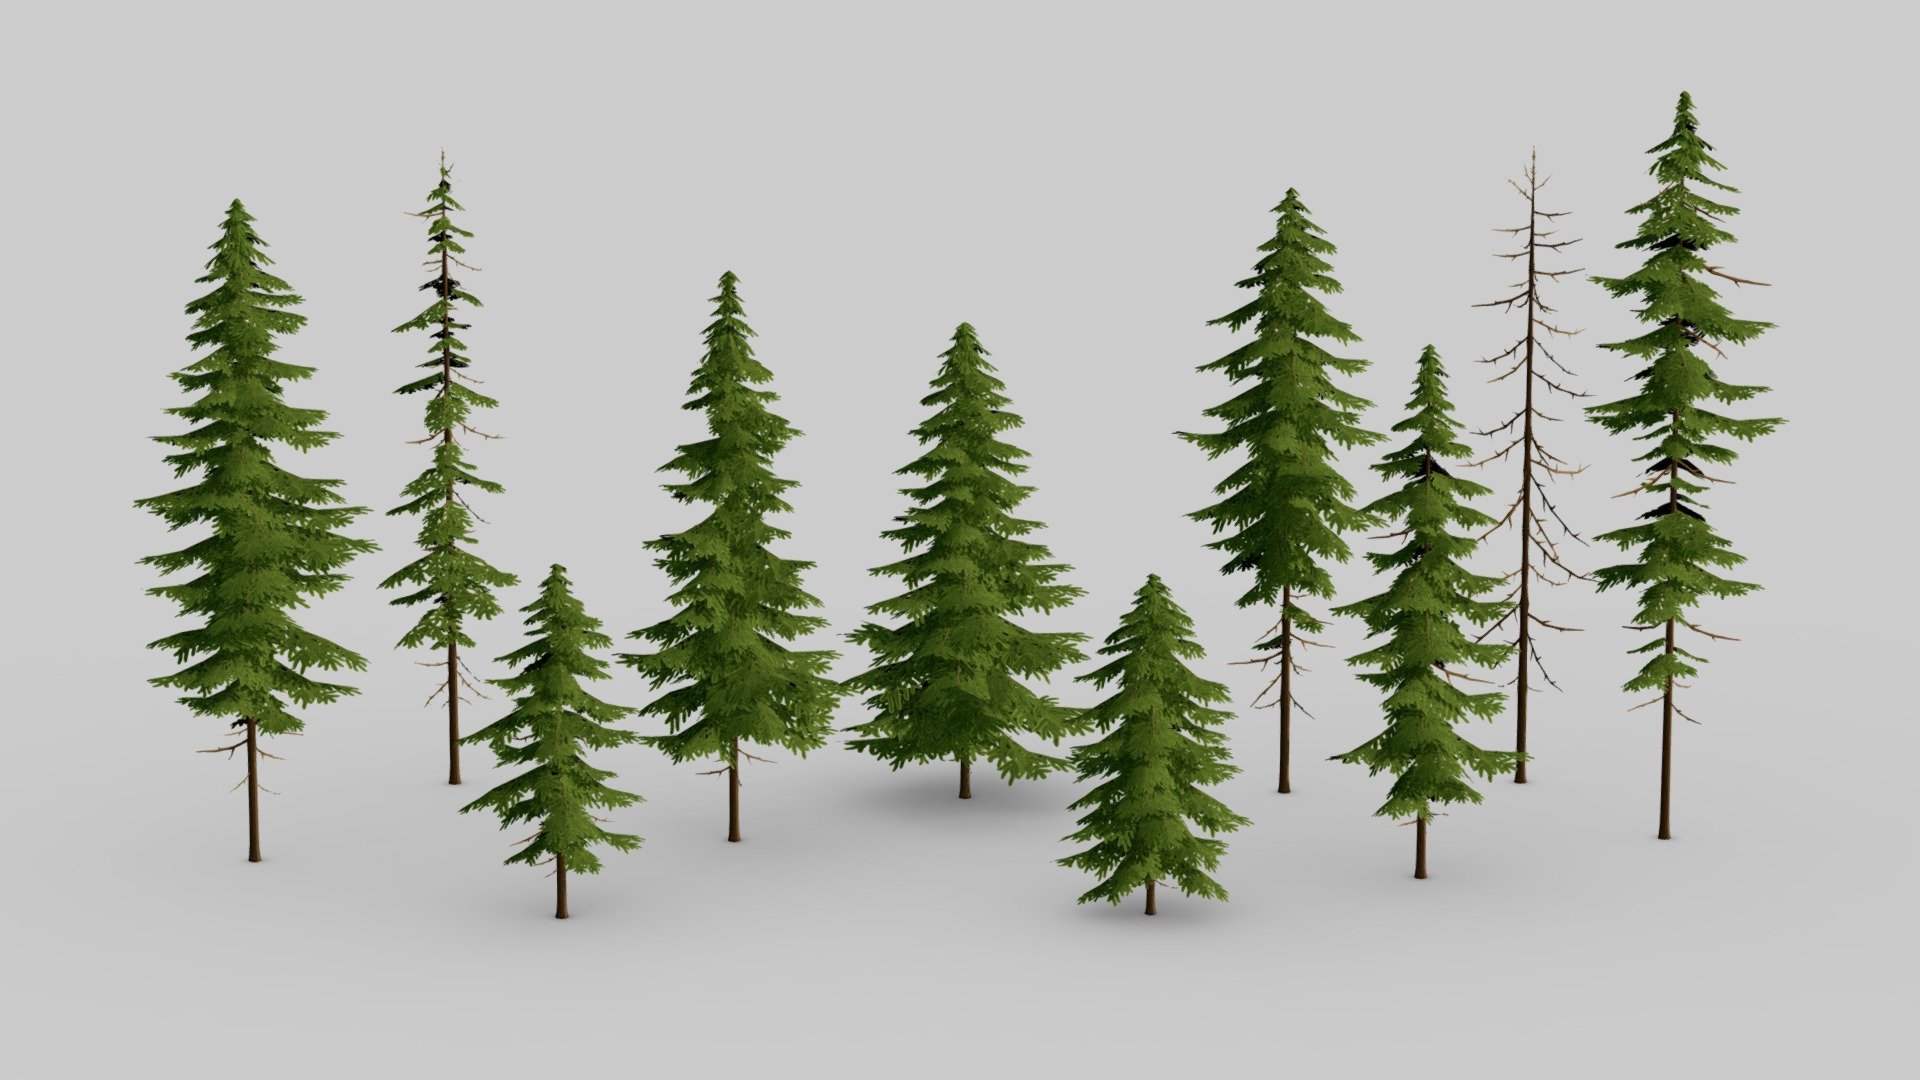 A Textured Low-poly, Cartoonish, Stylized trees using PBR Materials, With an Optimization for game-ready in mind.

All Texture resolution is 1K for scalability purposes. Please adjust the texture resolution to support low-end hardware compatibility.

Every Mesh, Texture, and Material is a fully Named convention for easy organization and expandable.

Real time rendering in marmoset toolbag .

File Formats : .FBX /.OBJ

Real world scale / Unit System in blender : Metri(Meters) / Unit Scale : 1.0

( Texture Size : 1024 x 1024 ).png


MaterialName_BaseColor

MaterialName_Roughness

MaterialName_Normal

MaterialName_OpacityMask - Model_G90 - 3D model by OHOW 3d model